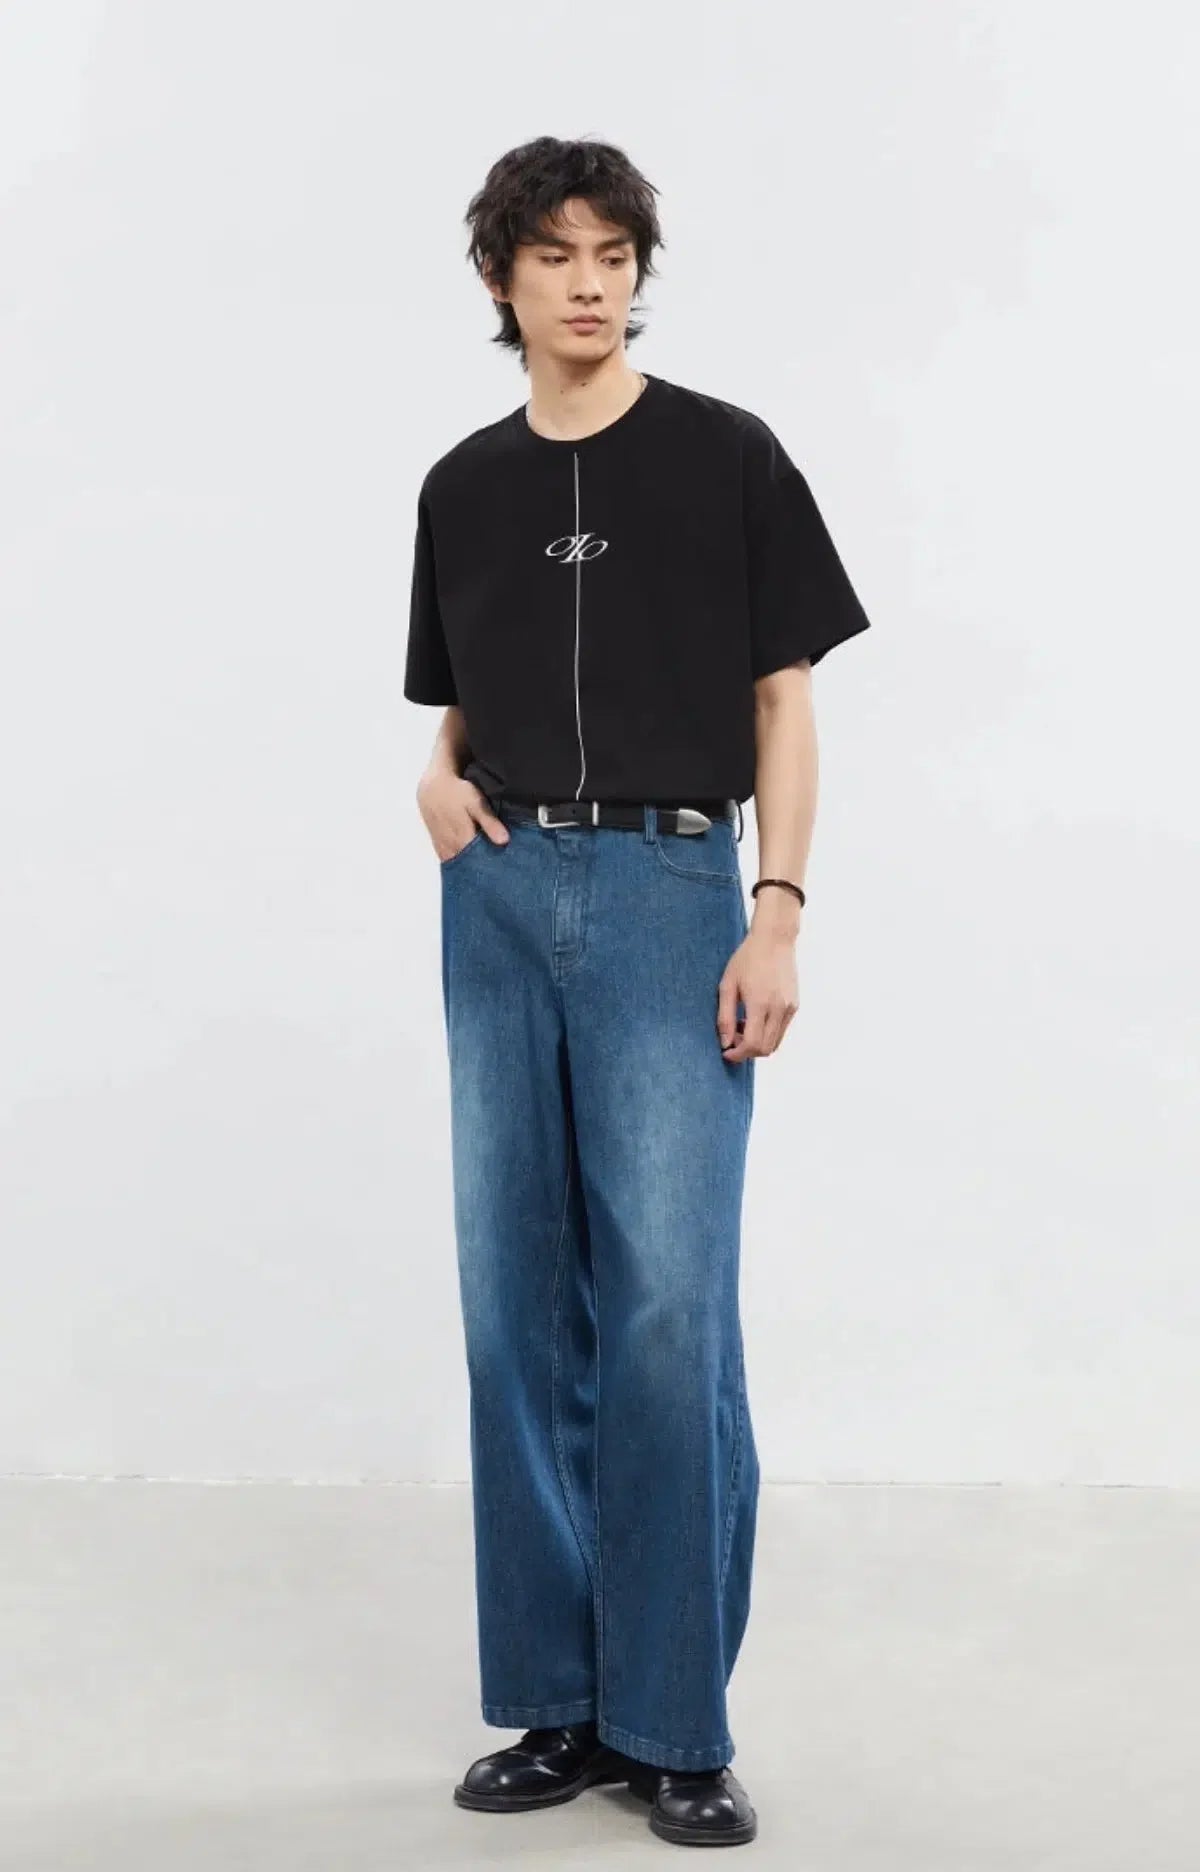 Middle Line Regular Fit T-Shirt Korean Street Fashion T-Shirt By Opicloth Shop Online at OH Vault